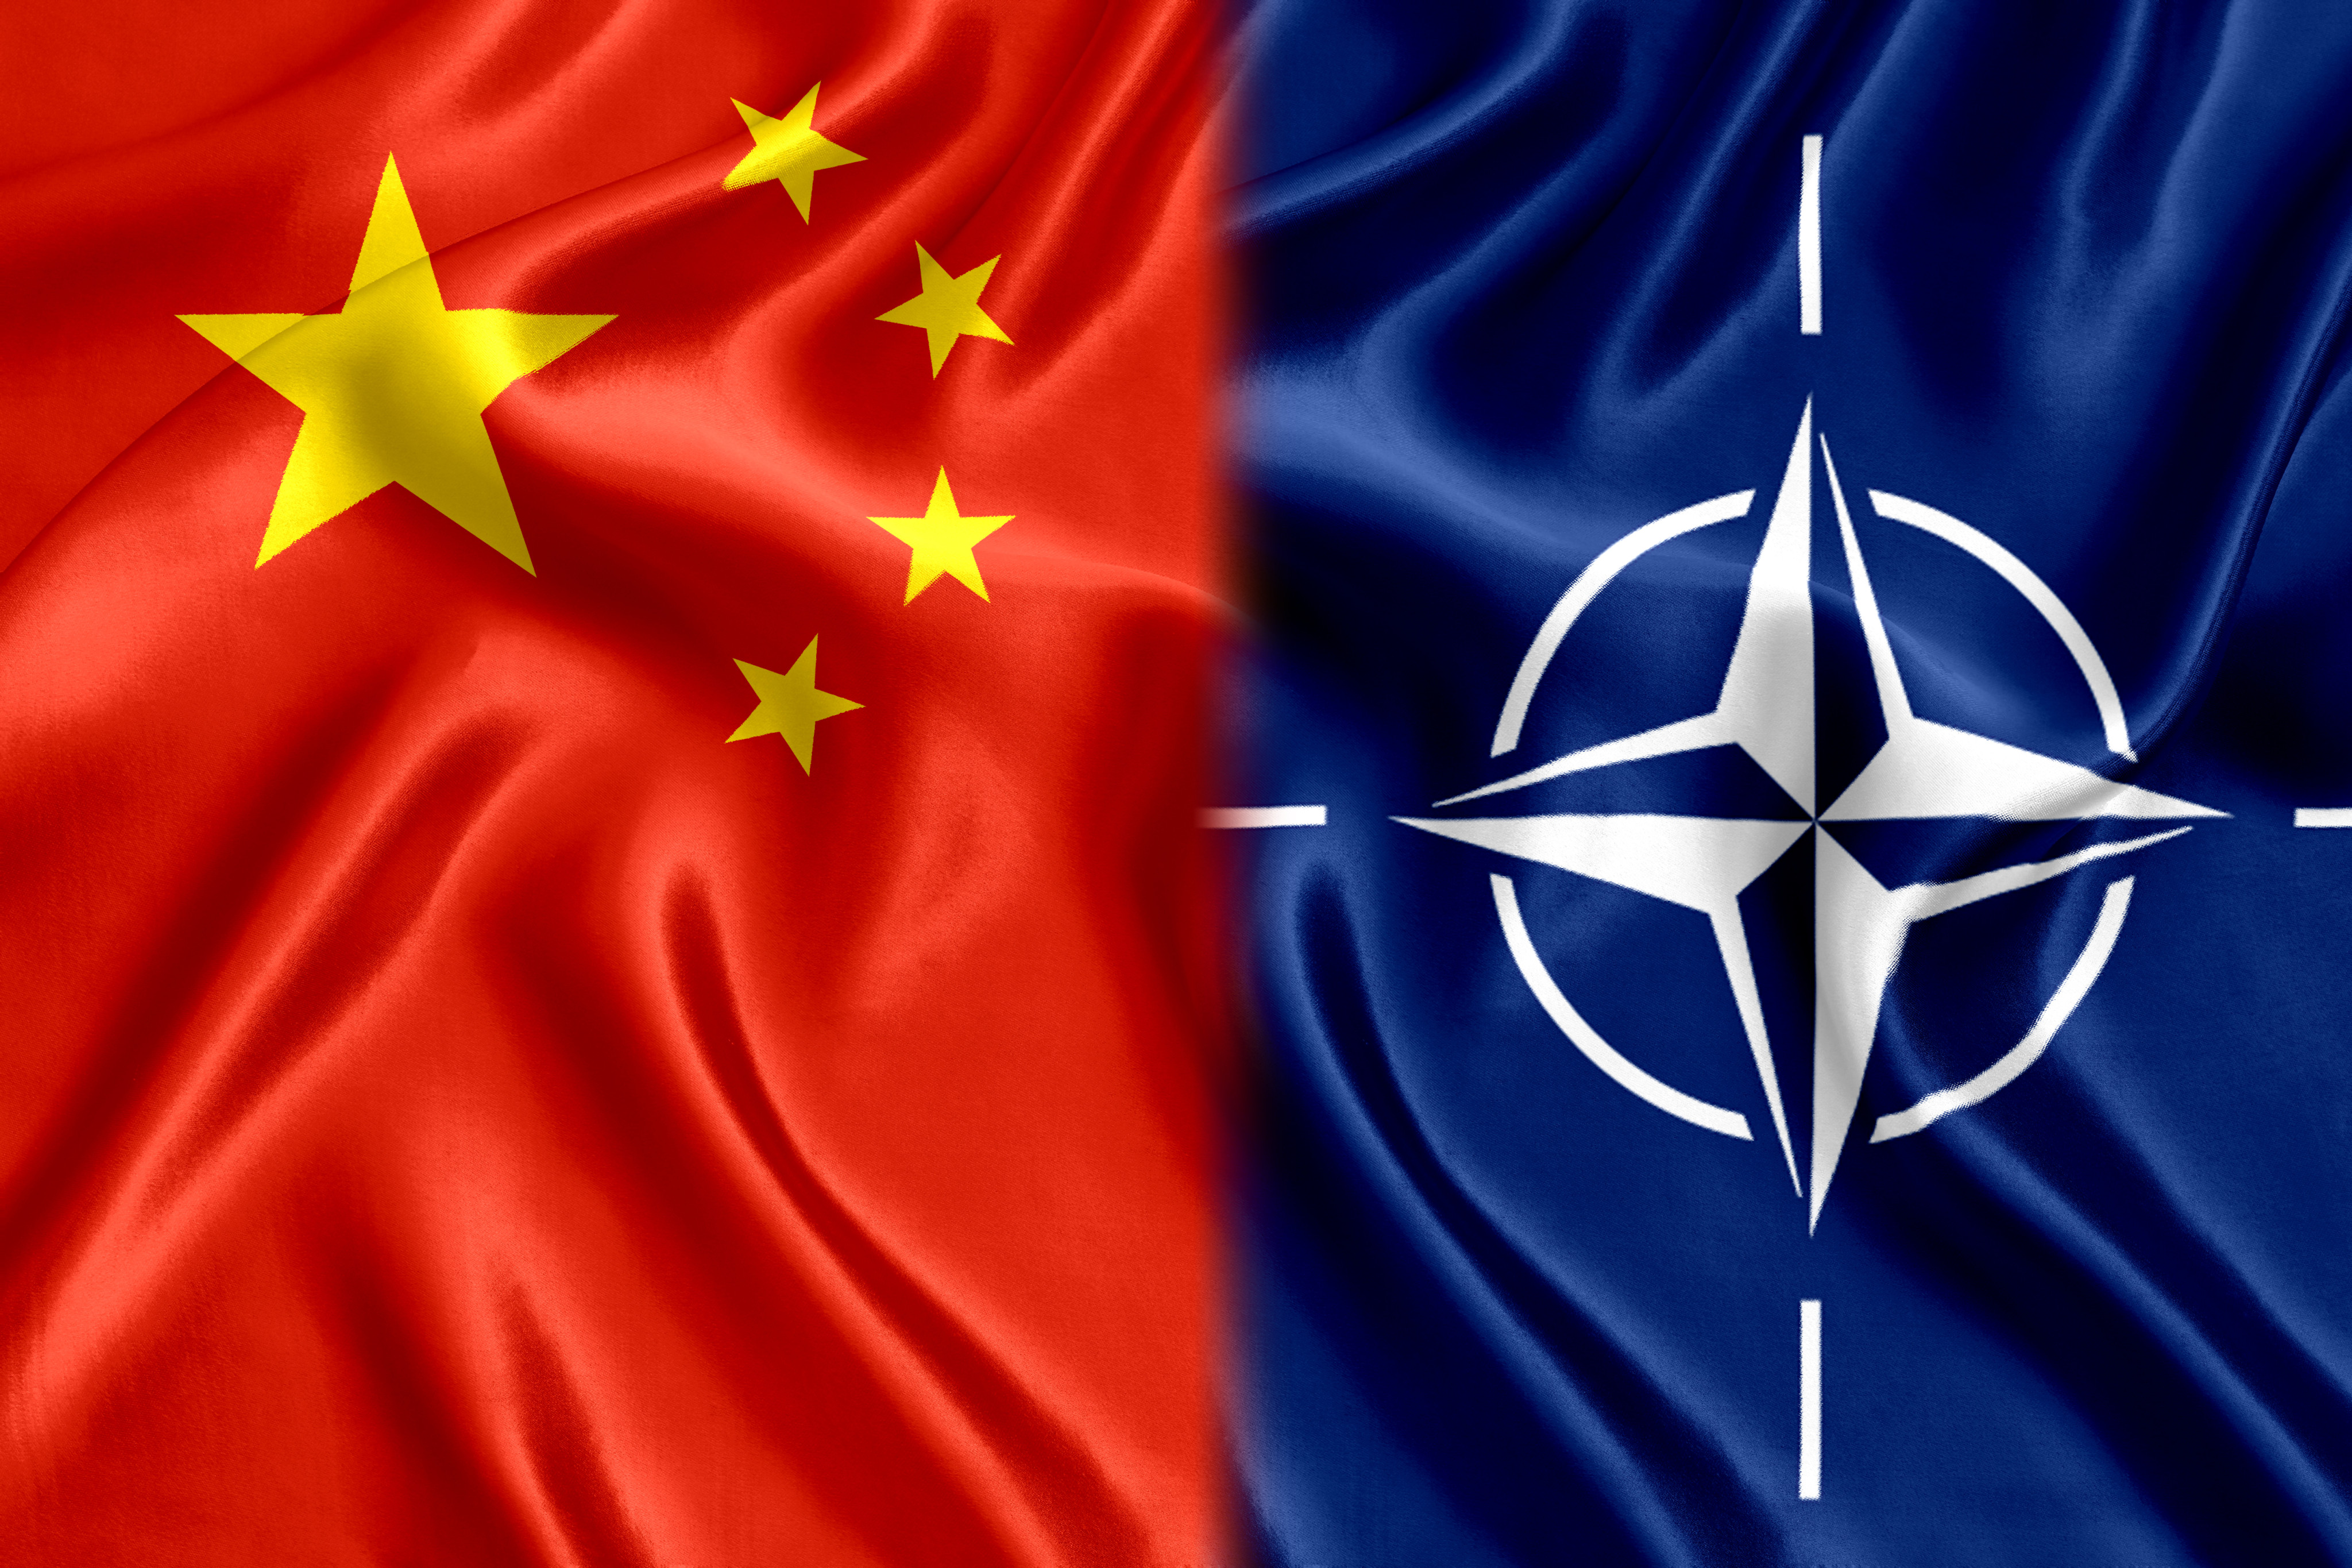 A recent survey across all 30 Nato member states found China was viewed as a security threat by 52 per cent of respondents, an increase of 11 percentage points from 2021. Photo: Handout